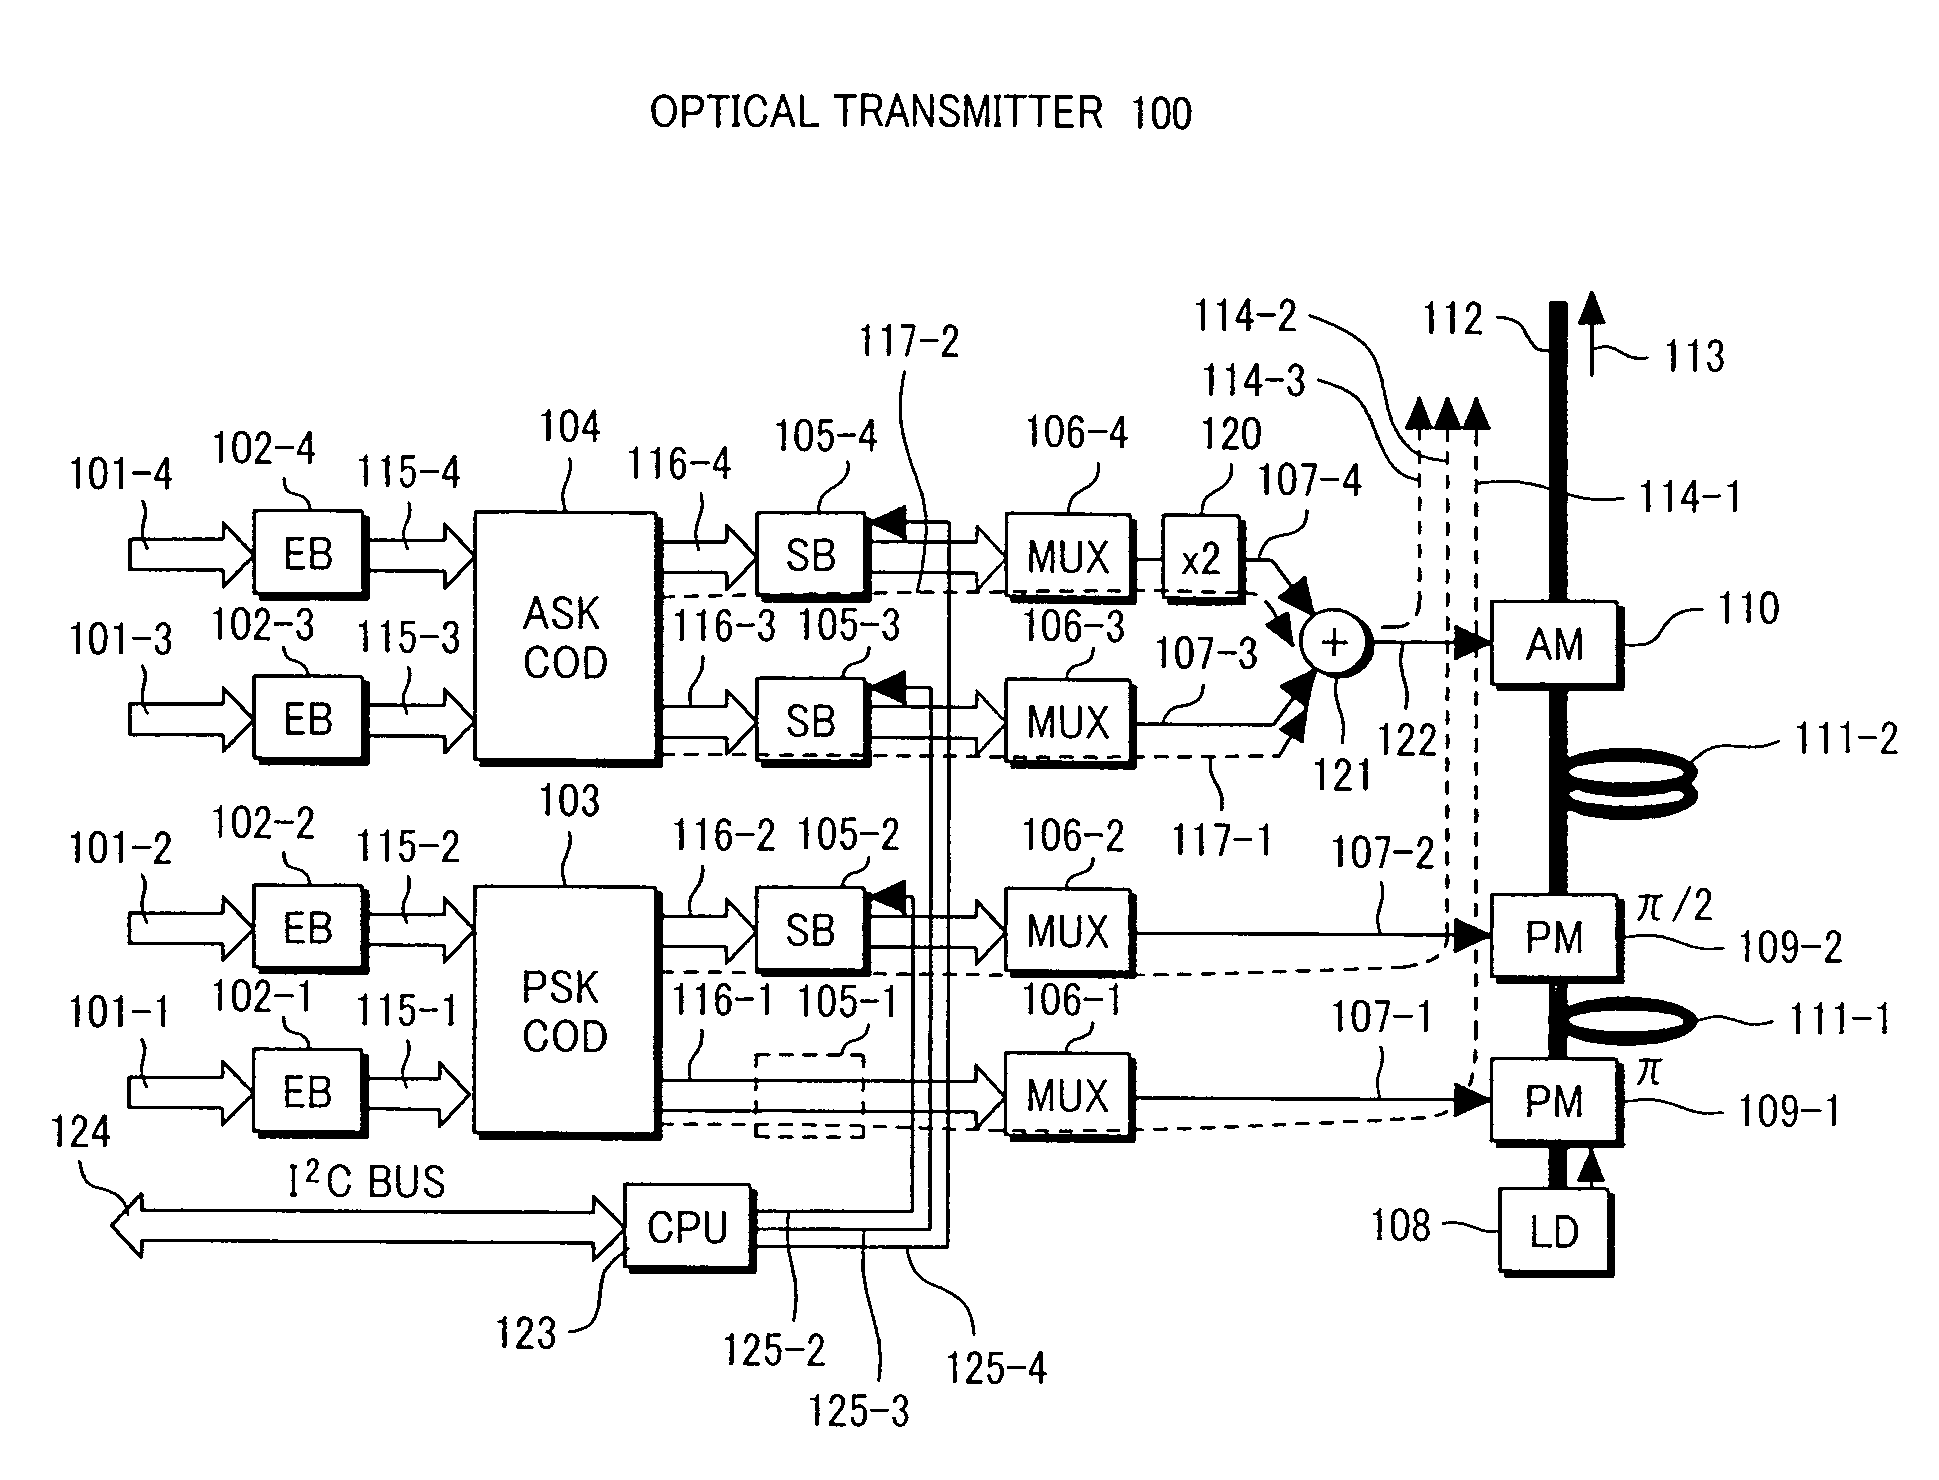 Optical transmission equipment and integrated circuit